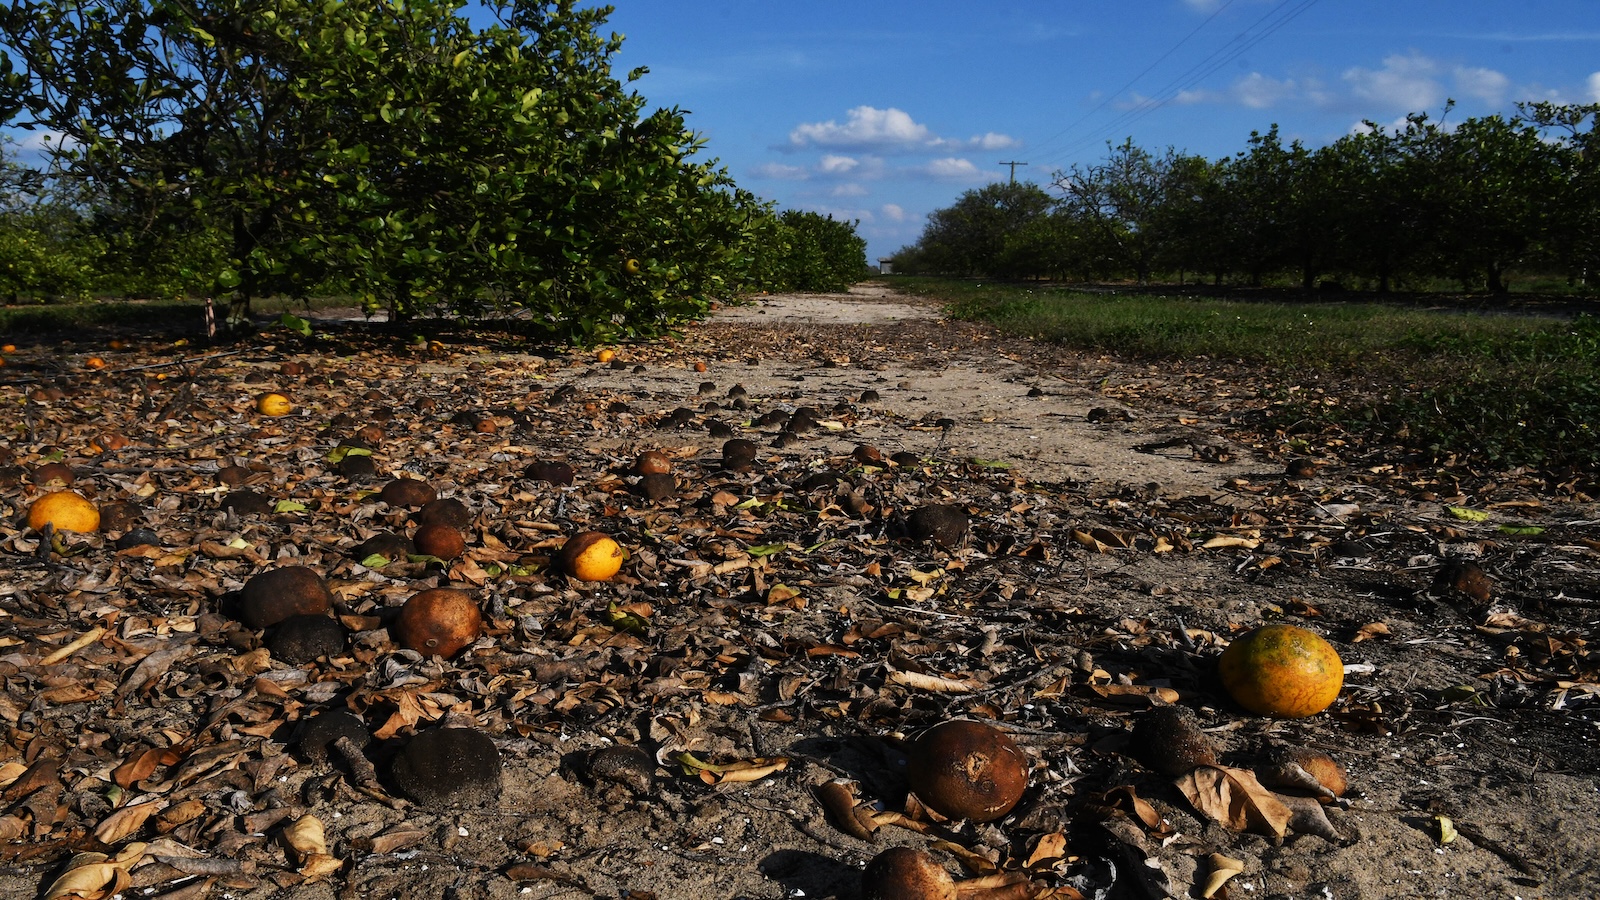 Oranges lay scattered on the ground in a grove